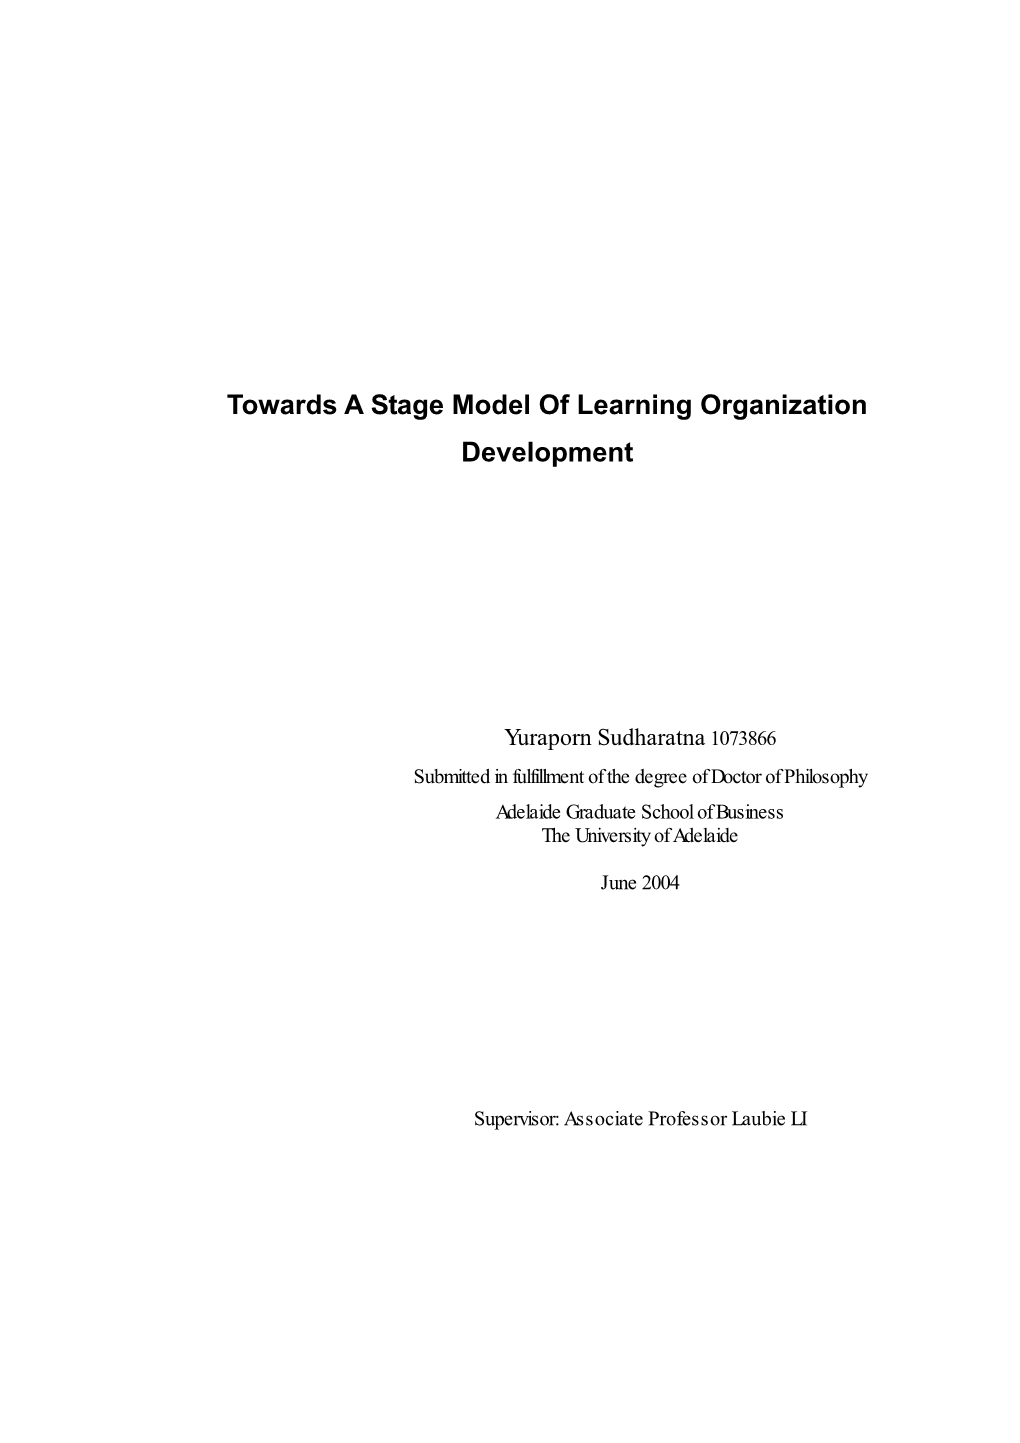 Towards a Stage Model of Learning Organization Development